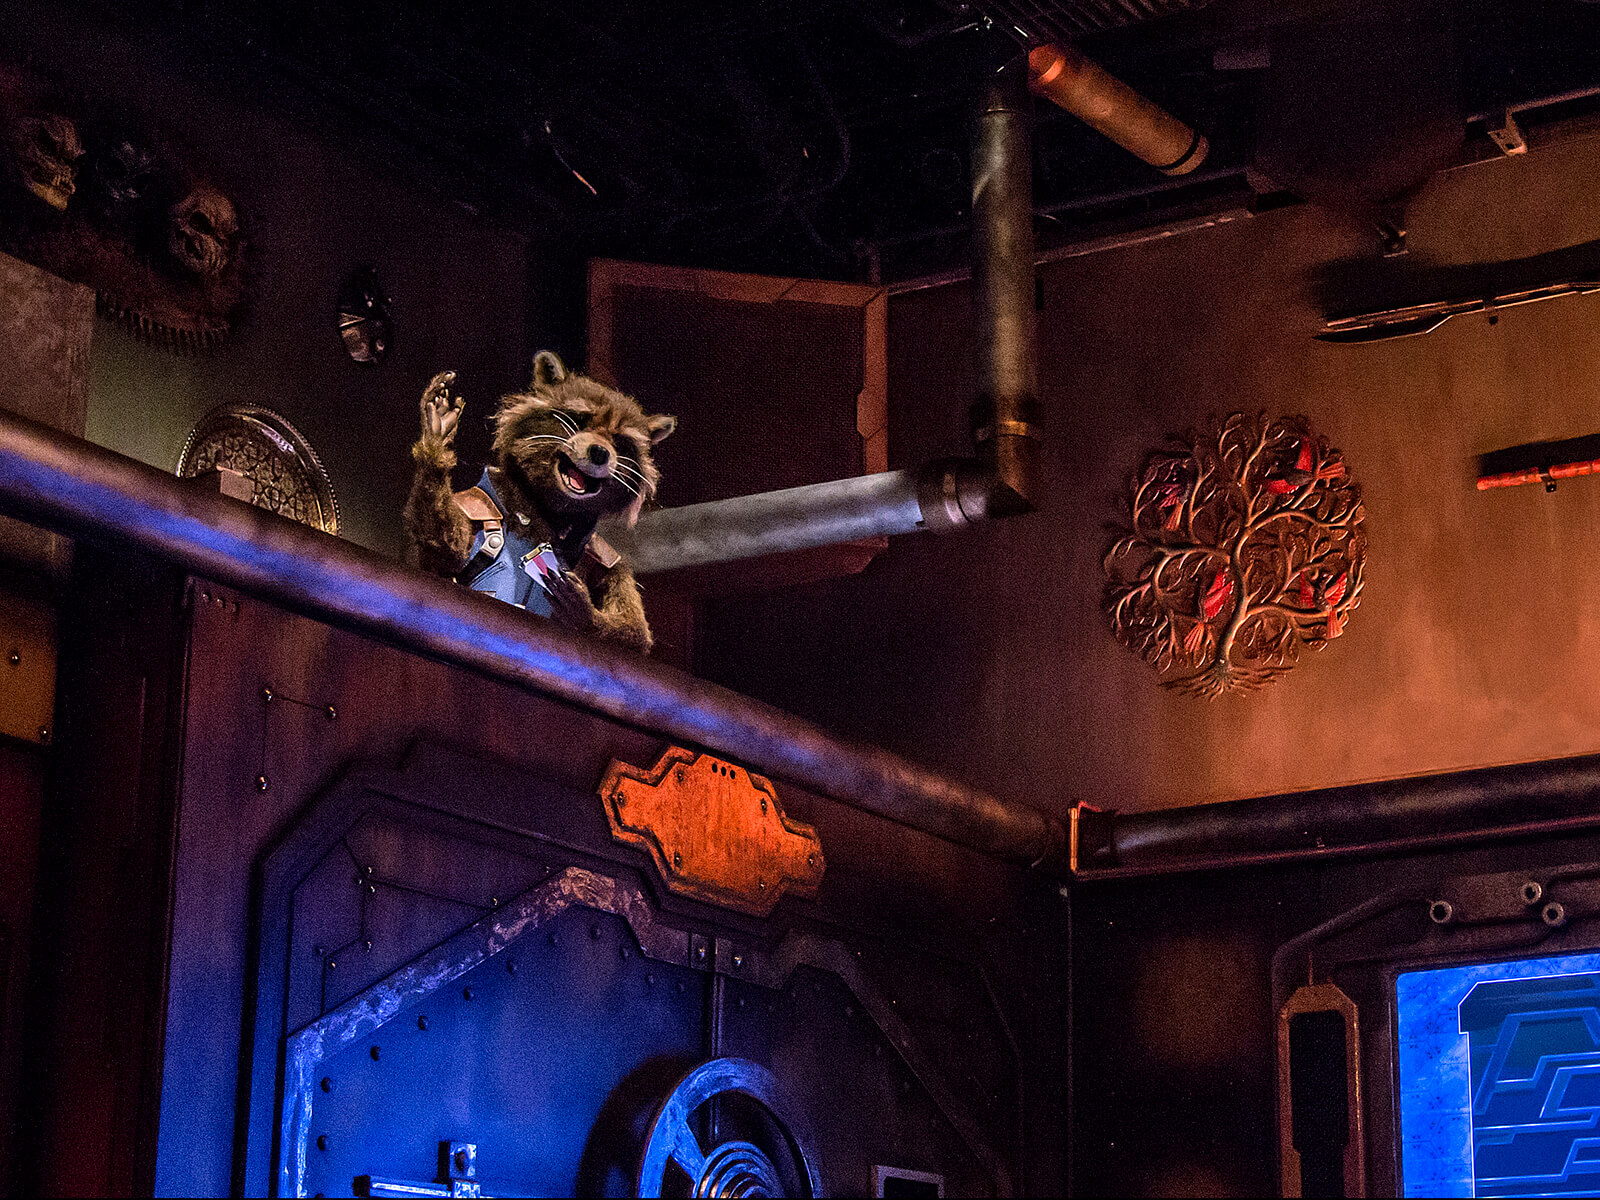 Audio-animatronic Rocket Raccoon welcomes riders to the Guardians of the Galaxy: Mission Breakout at Disney's California Adventure theme park